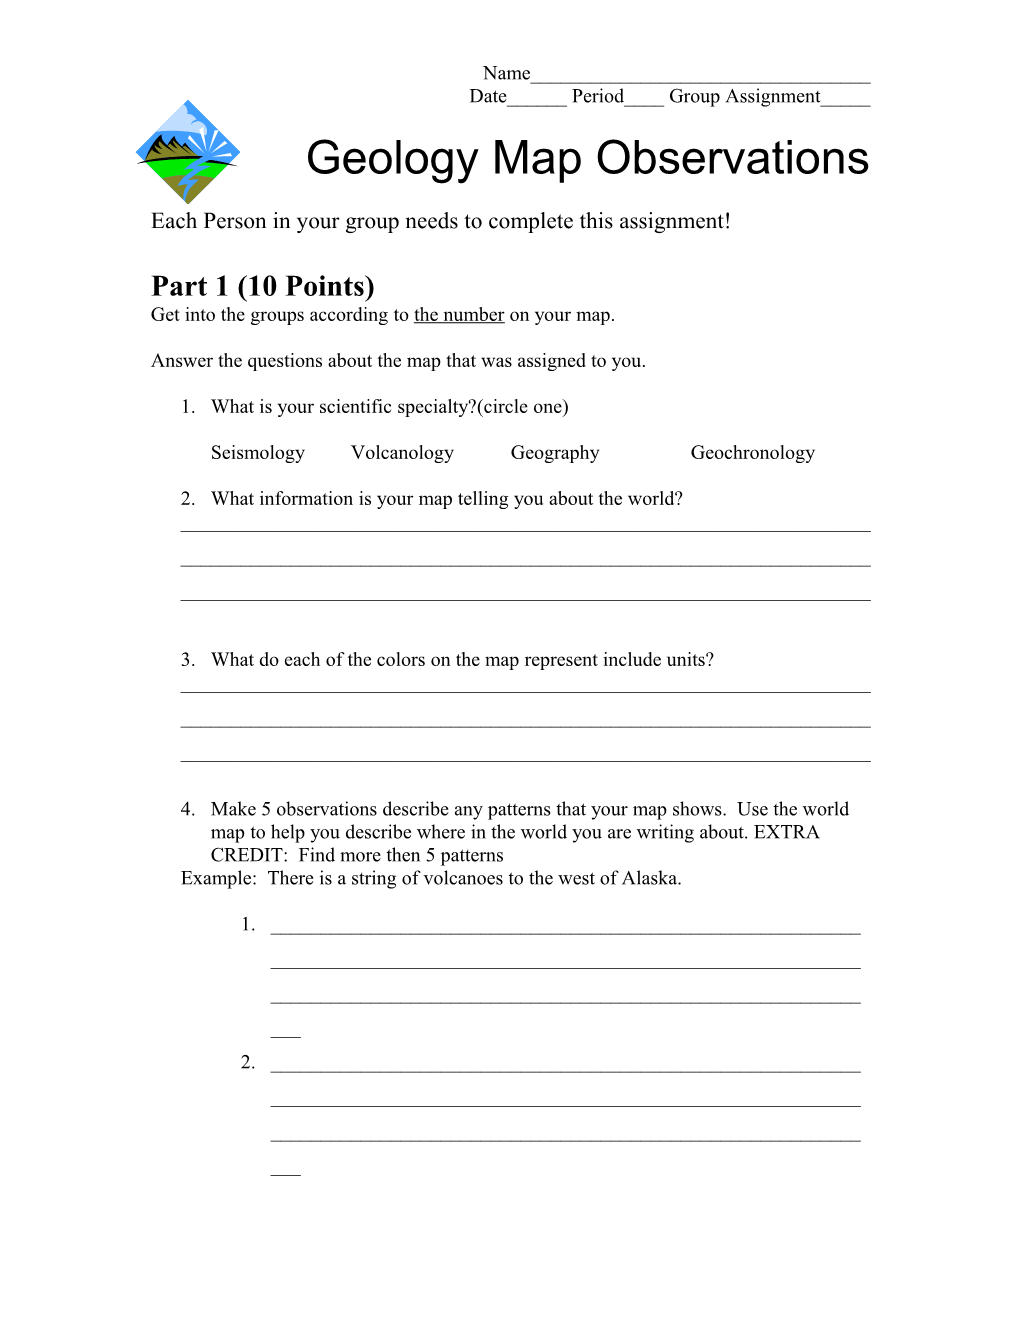 Geology Map Observations